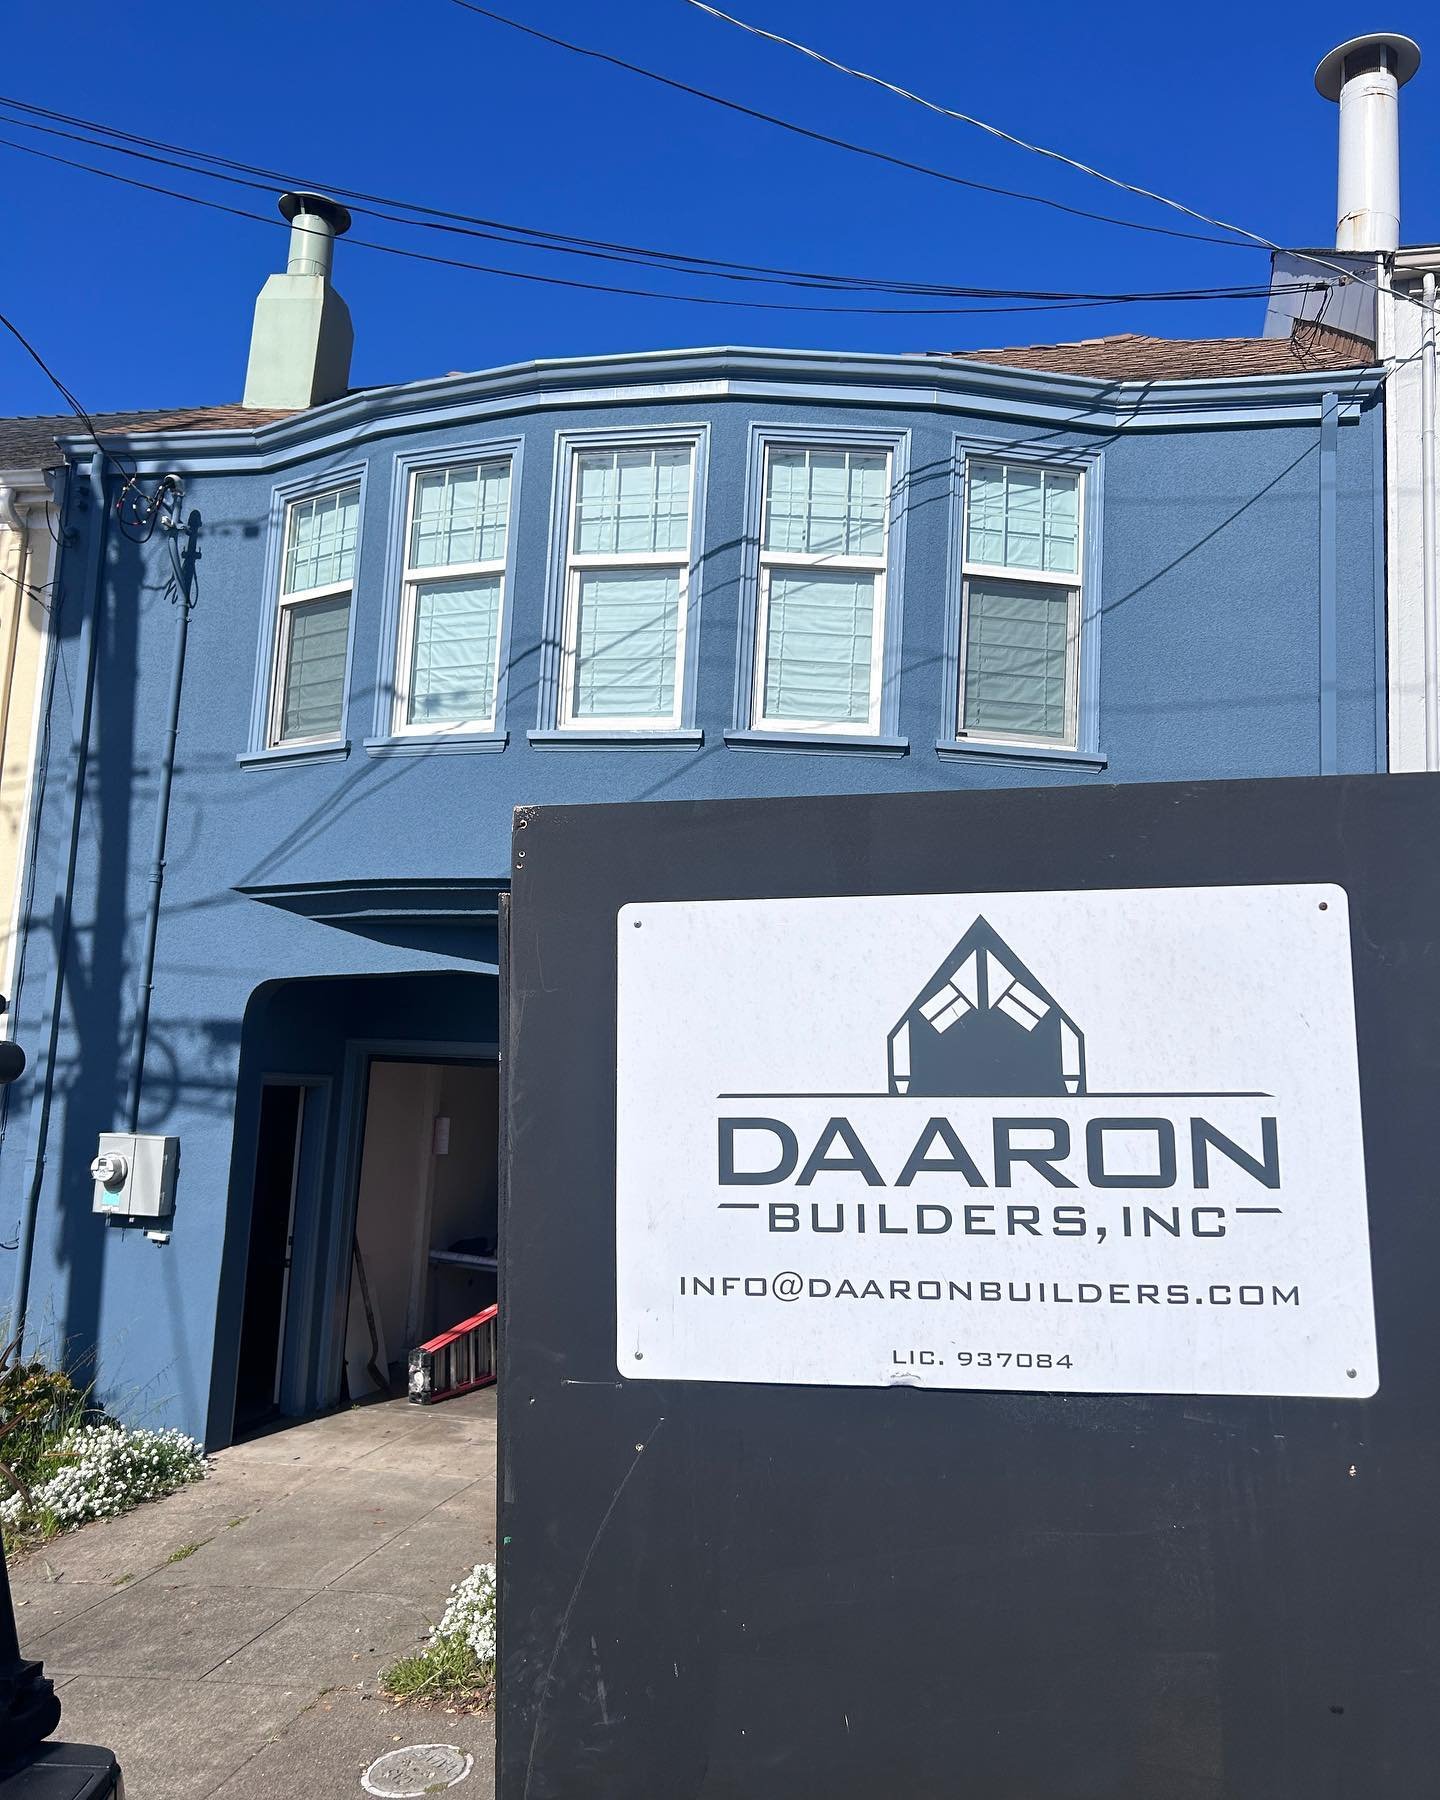 Mobilization is underway on some new projects as we wrap current ones. 

We are excited to have photo shoots booked to capture our work over the past several months. #landsend #remodel #sfbayarea #marvin #structuralengineering #daaronbuilders #mobili